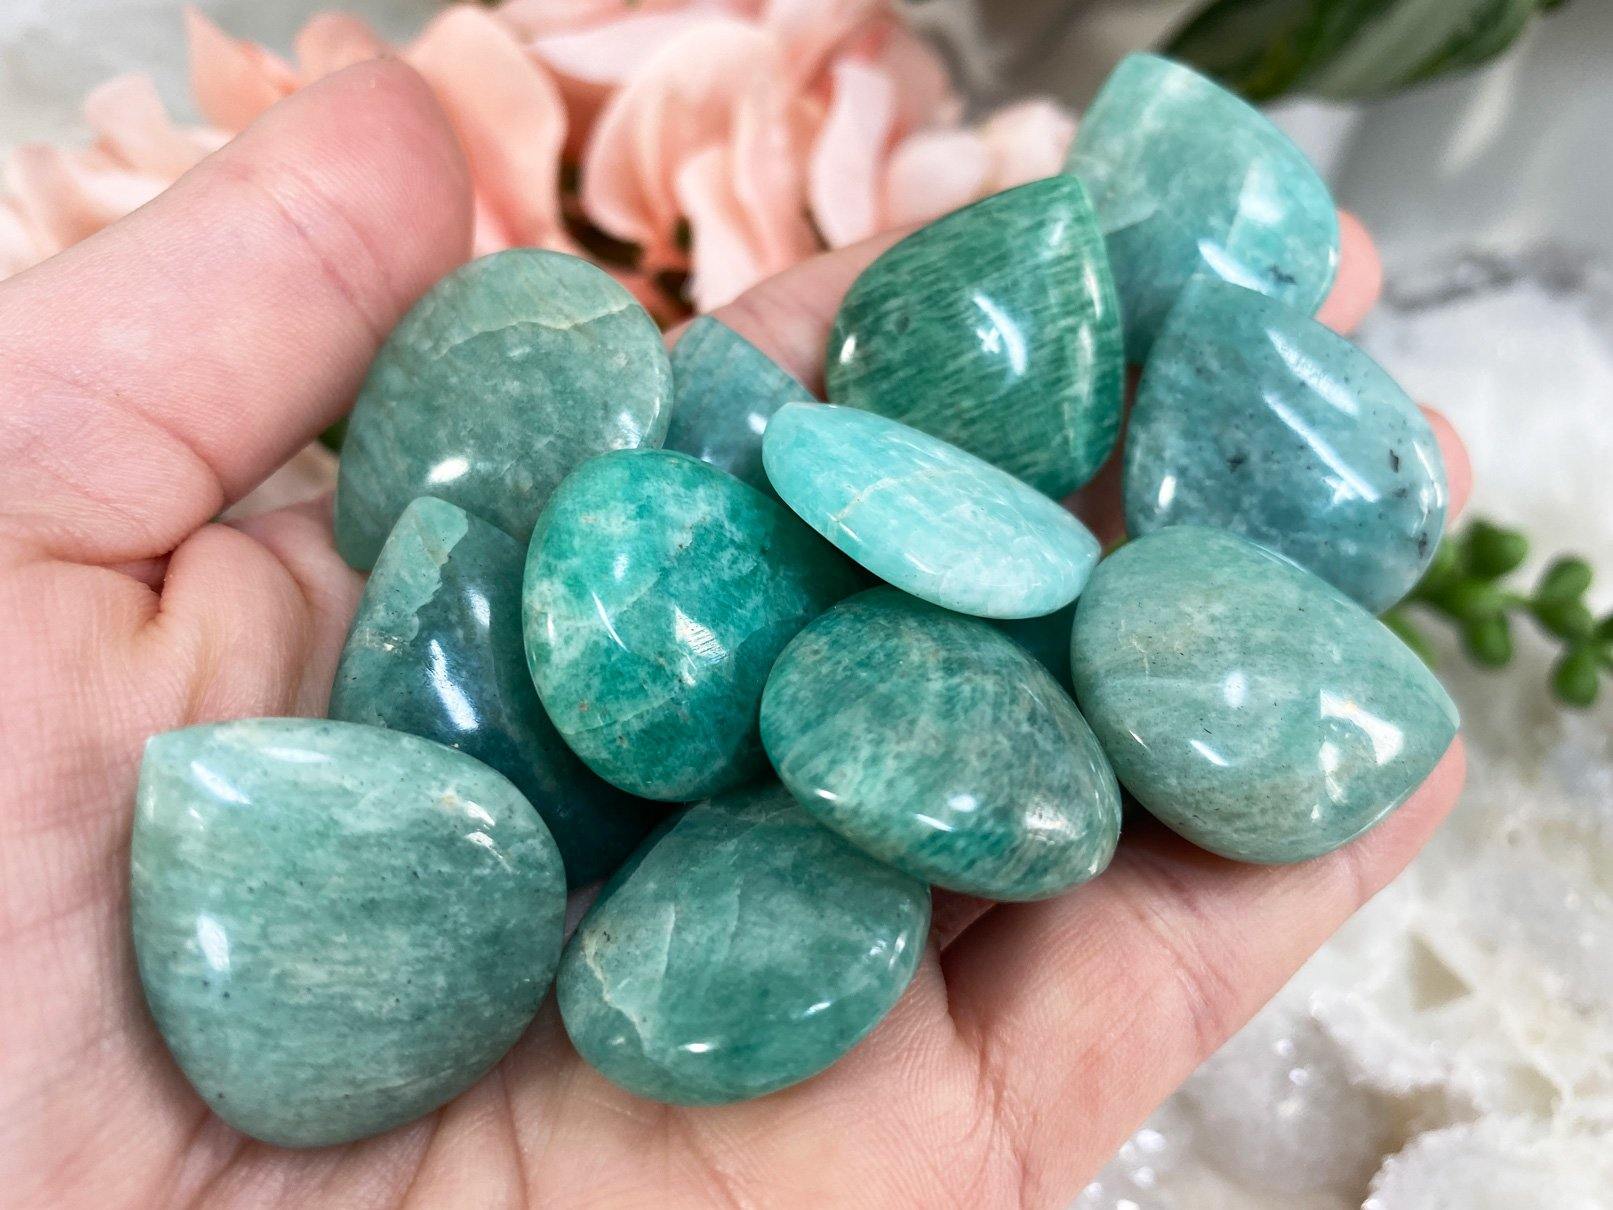 Amazonite tear drop pieces with a soothing color of teal blue! Great for wire wrapping or just a small piece to keep in your purse or pocket.